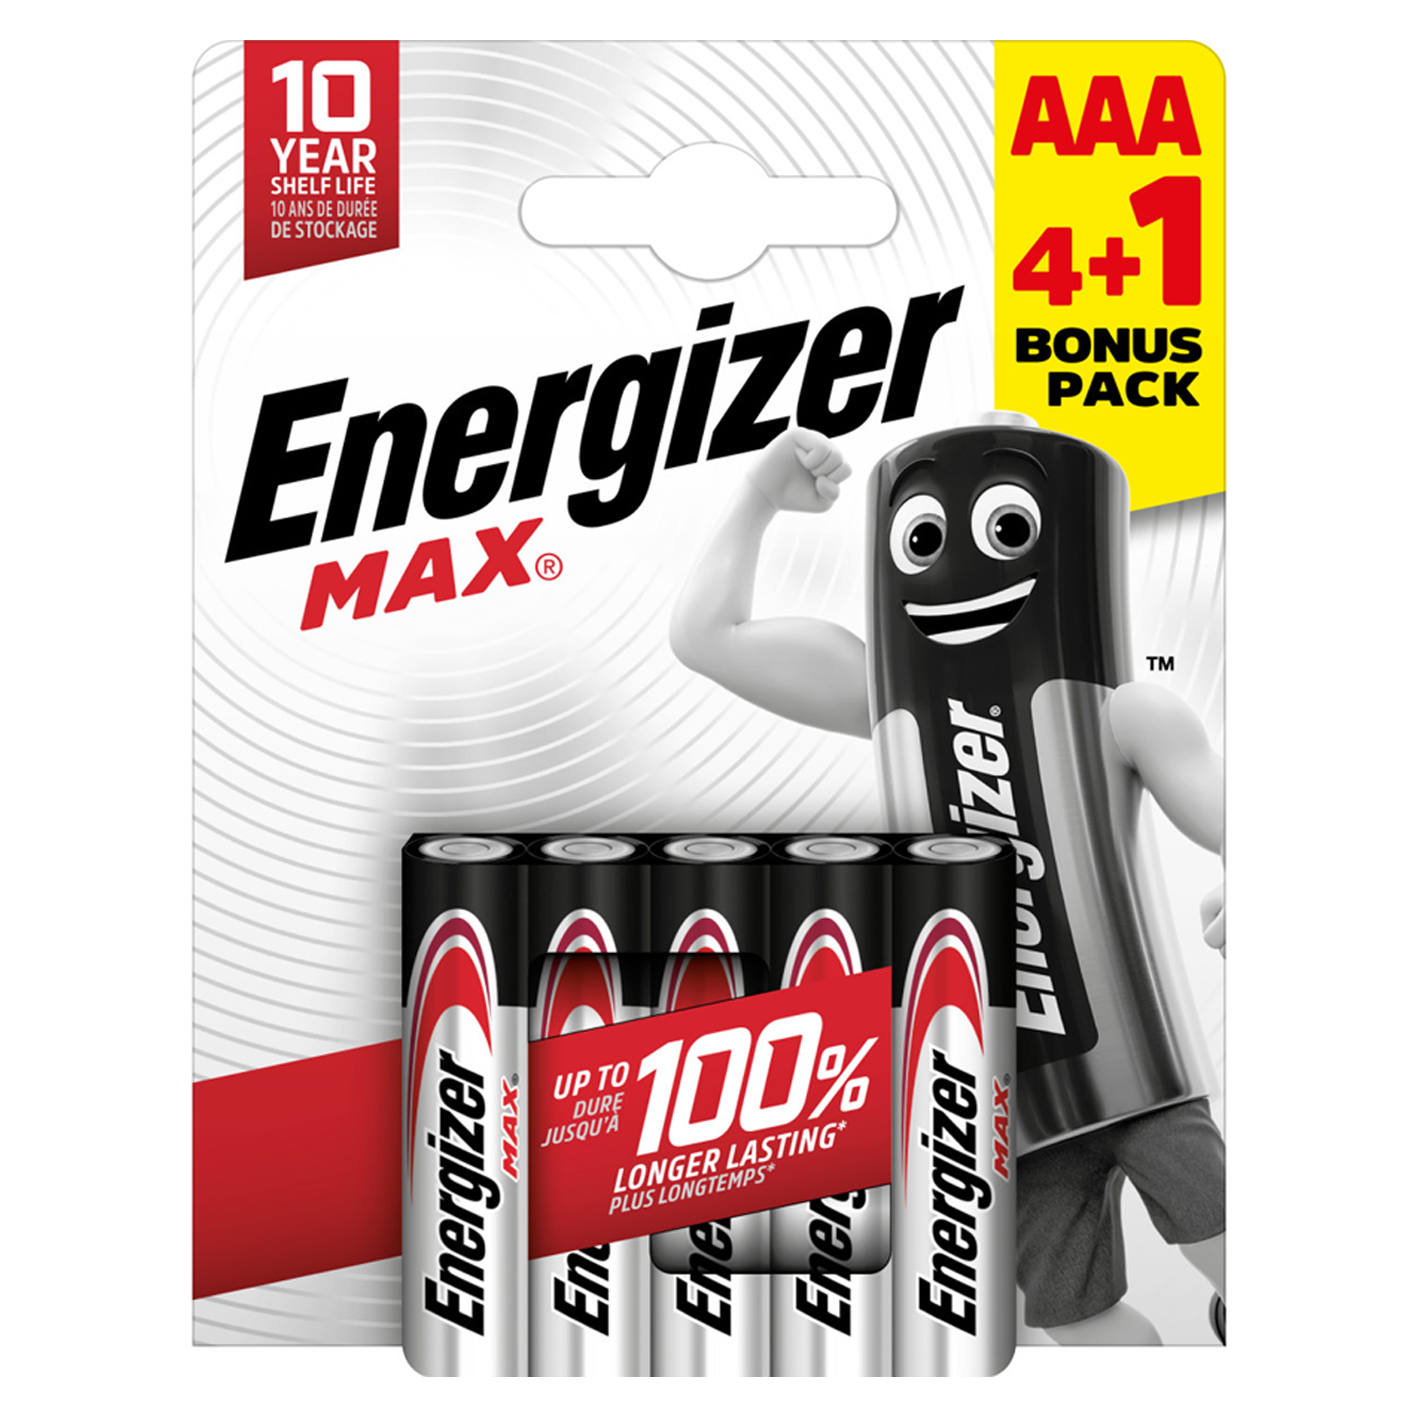 Energizer AAA Max Alkaline, Pack of 4+1